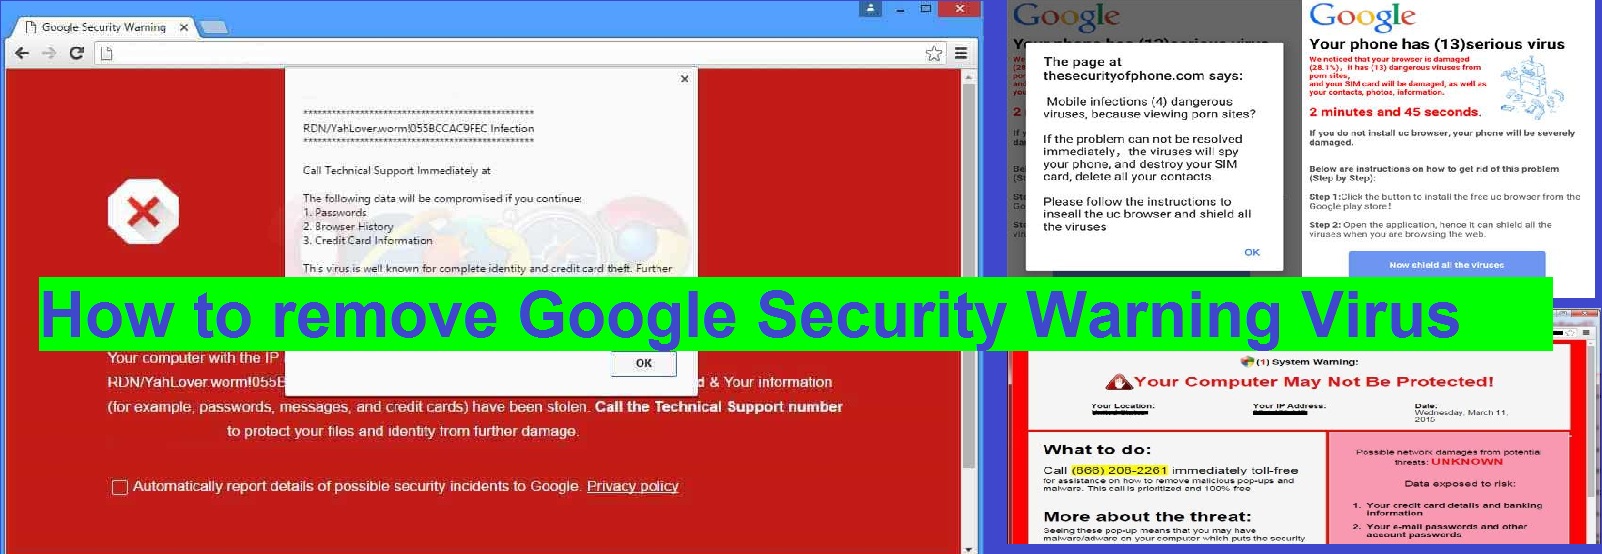 How to remove Google security Warning popups virus from Windows or Android